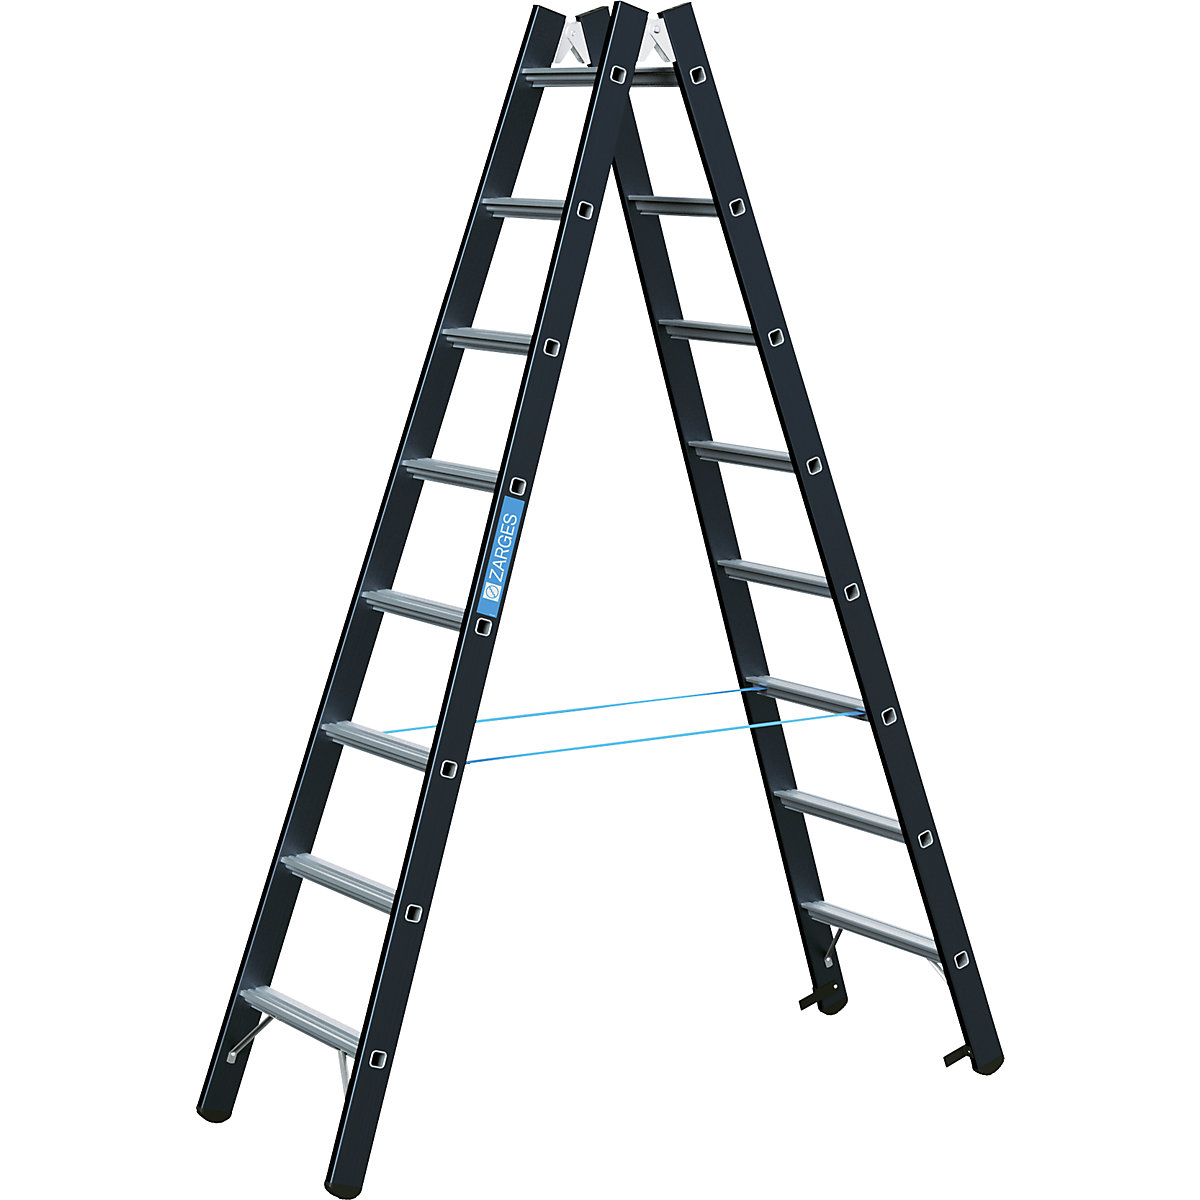 Heavy duty step ladder – ZARGES, double sided, 2 x 8 rungs-7